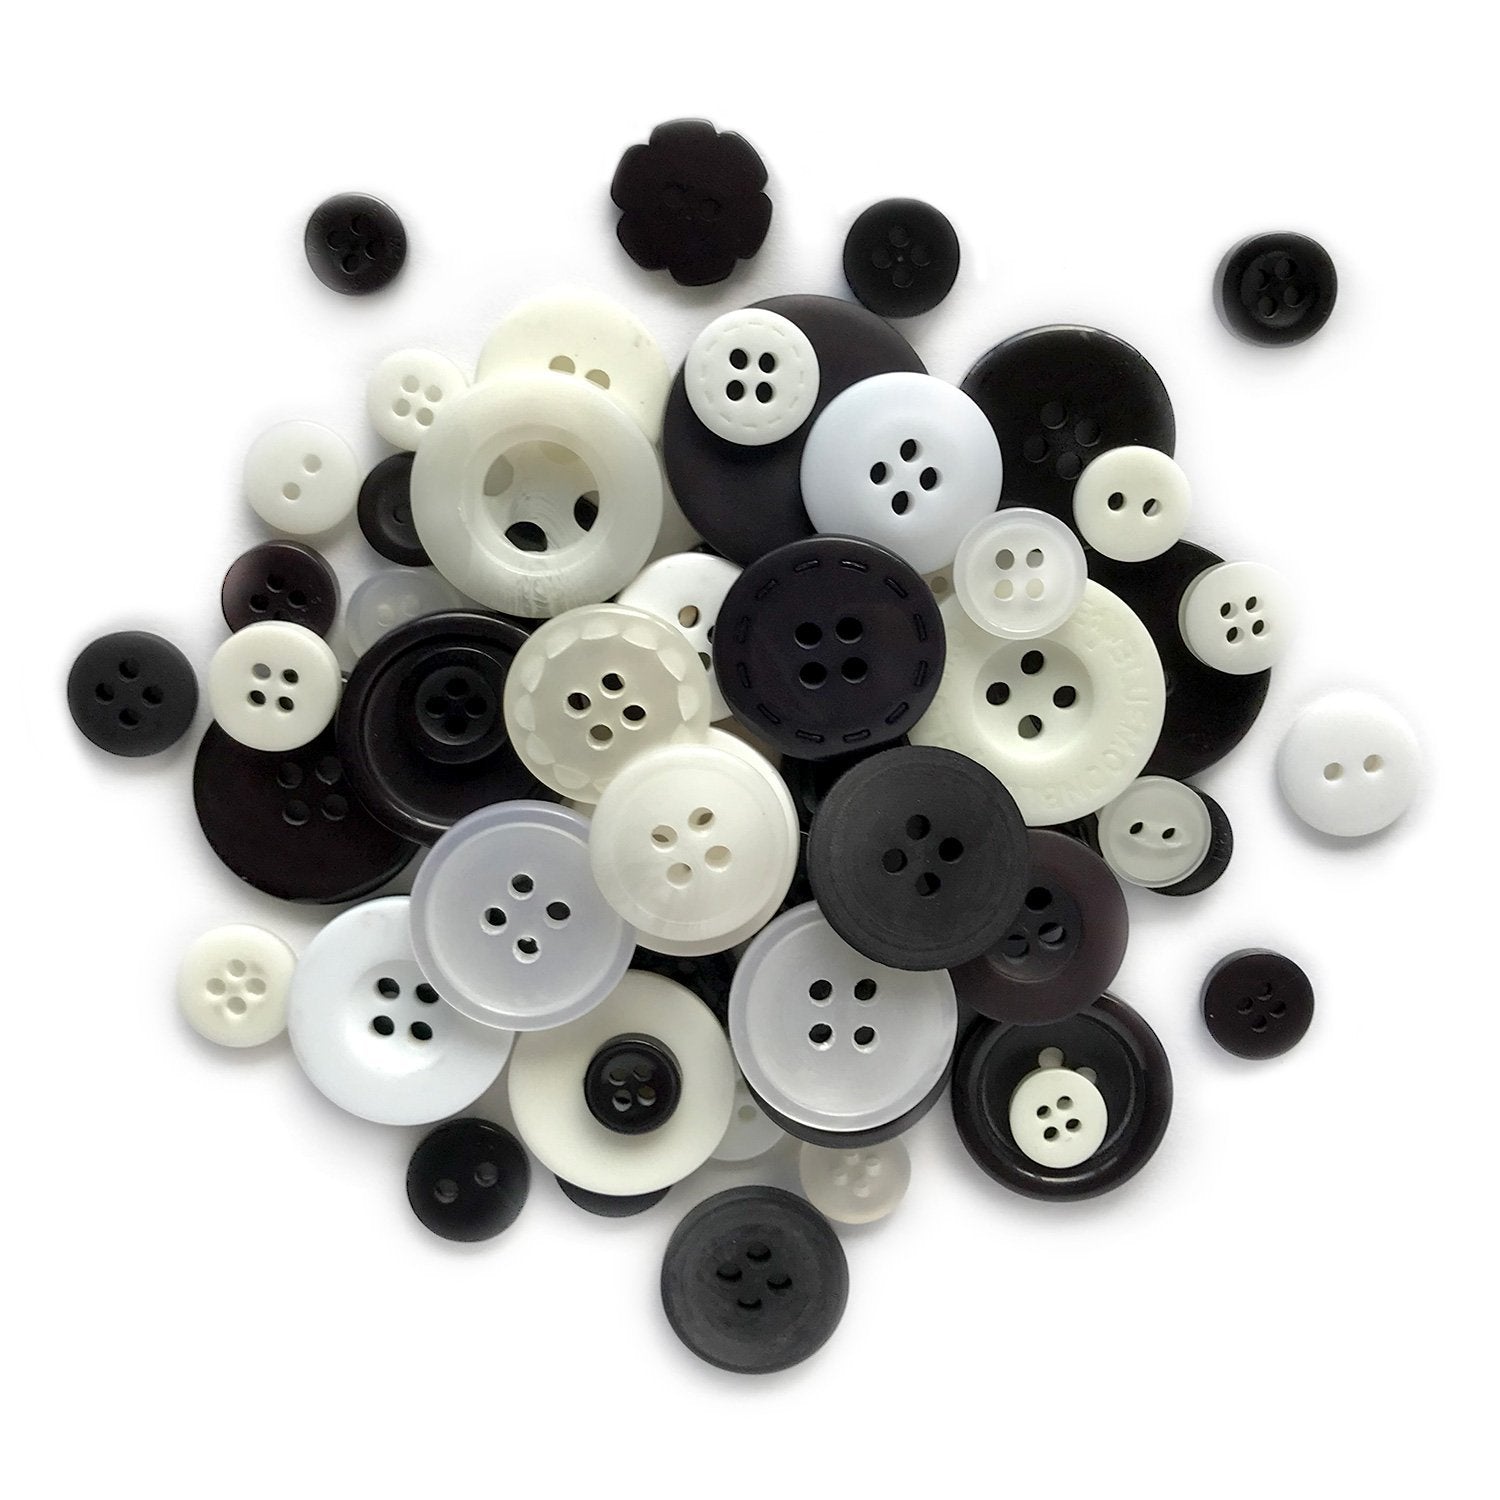 Buttons Galore and More Tiny Collection of Round Sewing & Craft Buttons -  Huge Selection of Colorful Small Buttons (Primary)